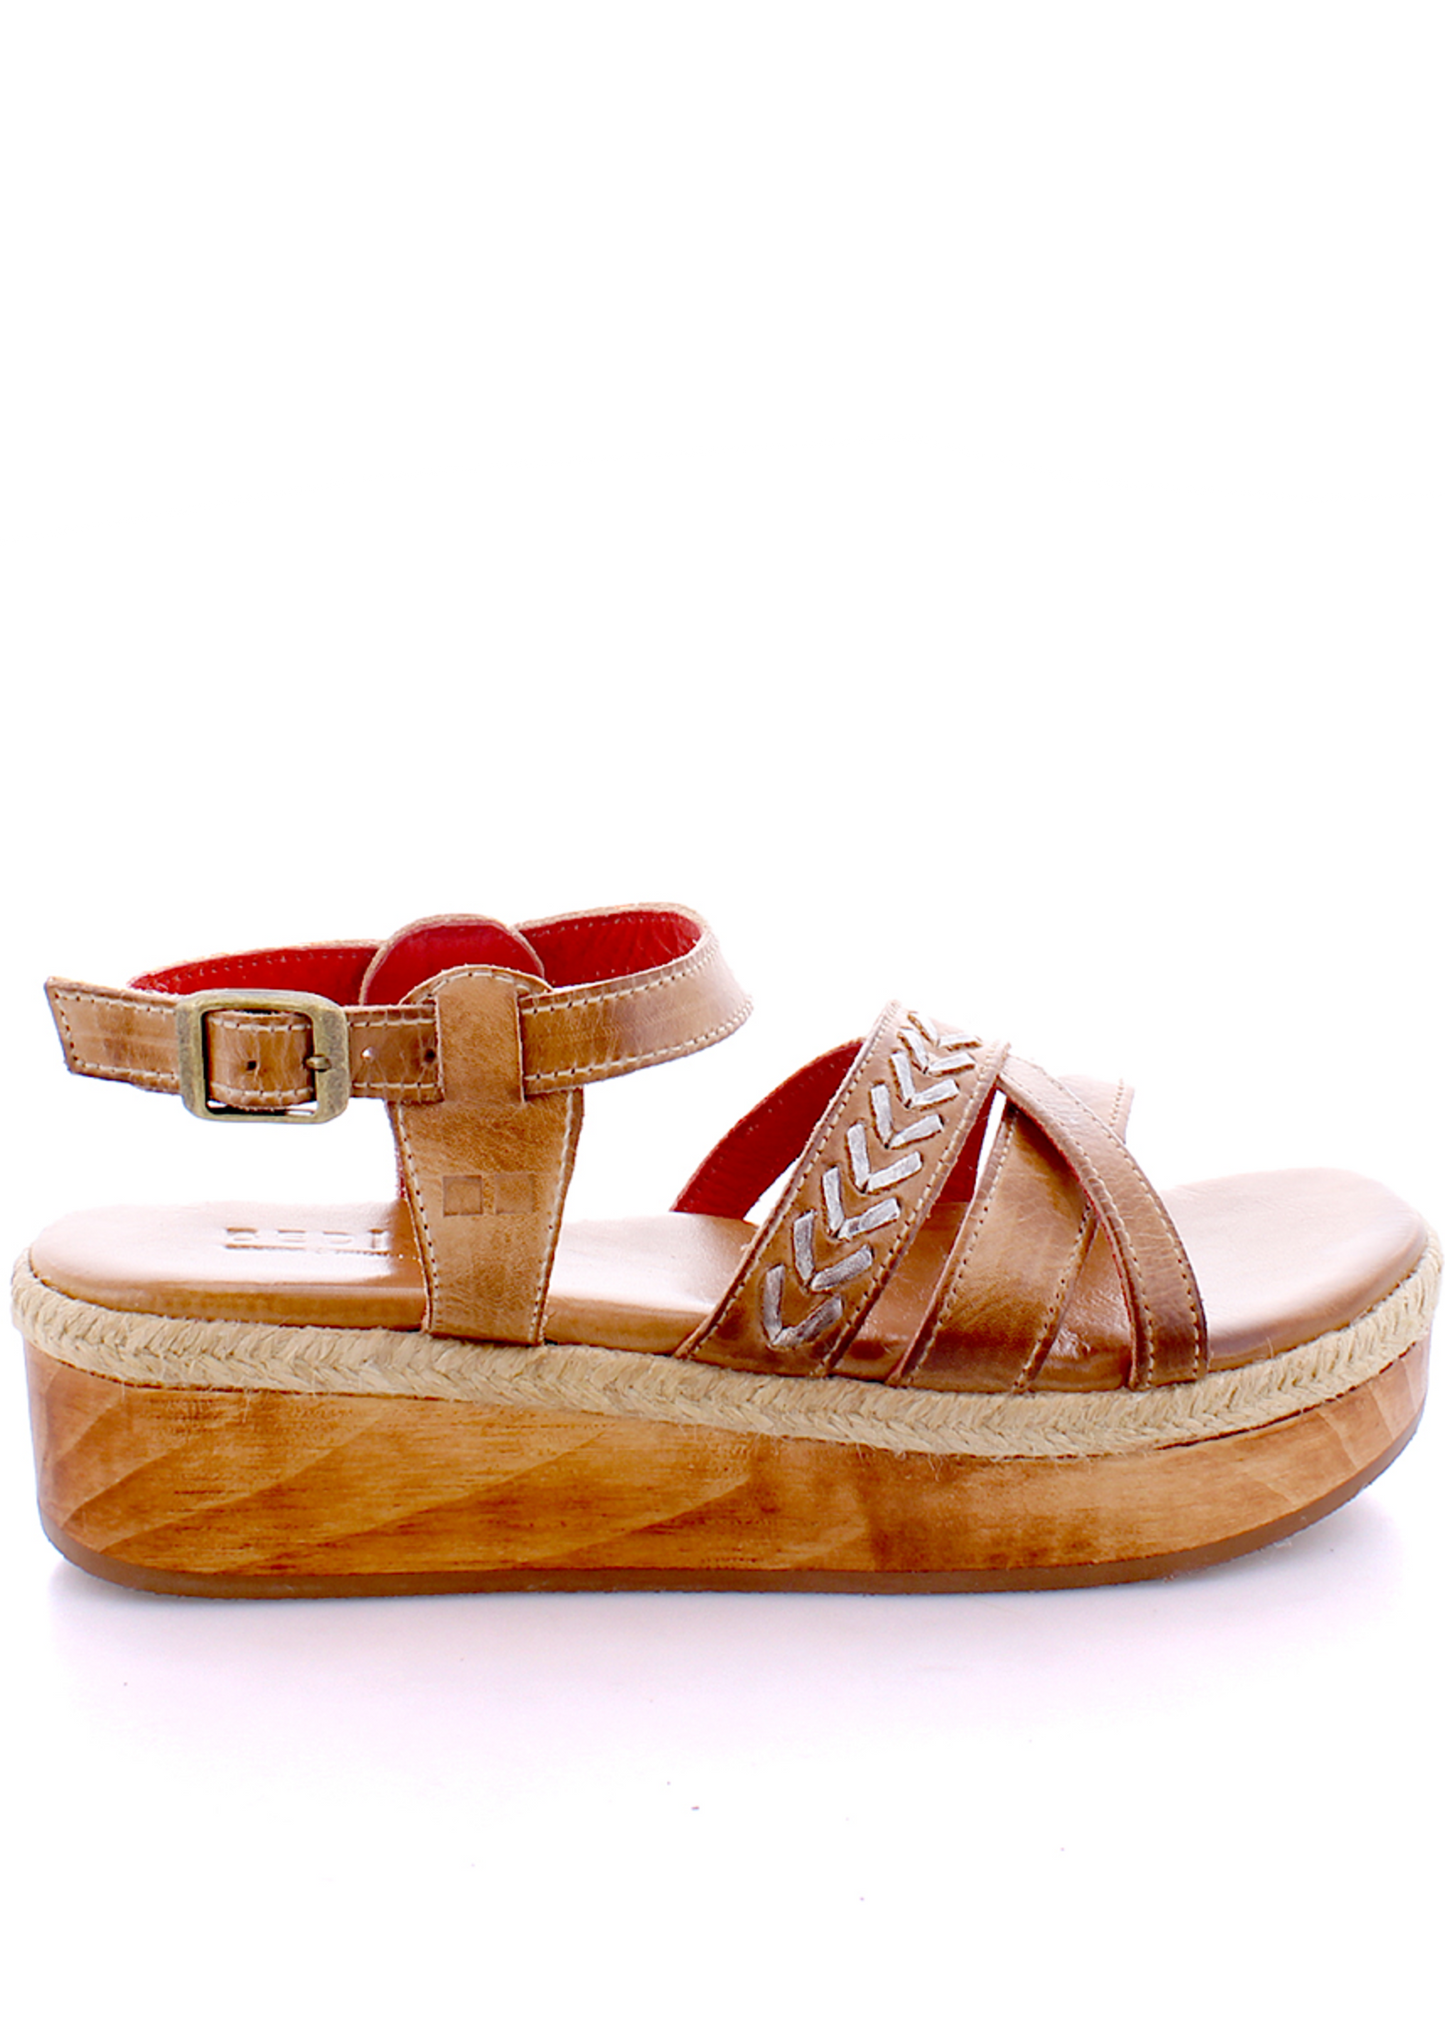 Necessary Tan Rustic Nectar Lux Sandal